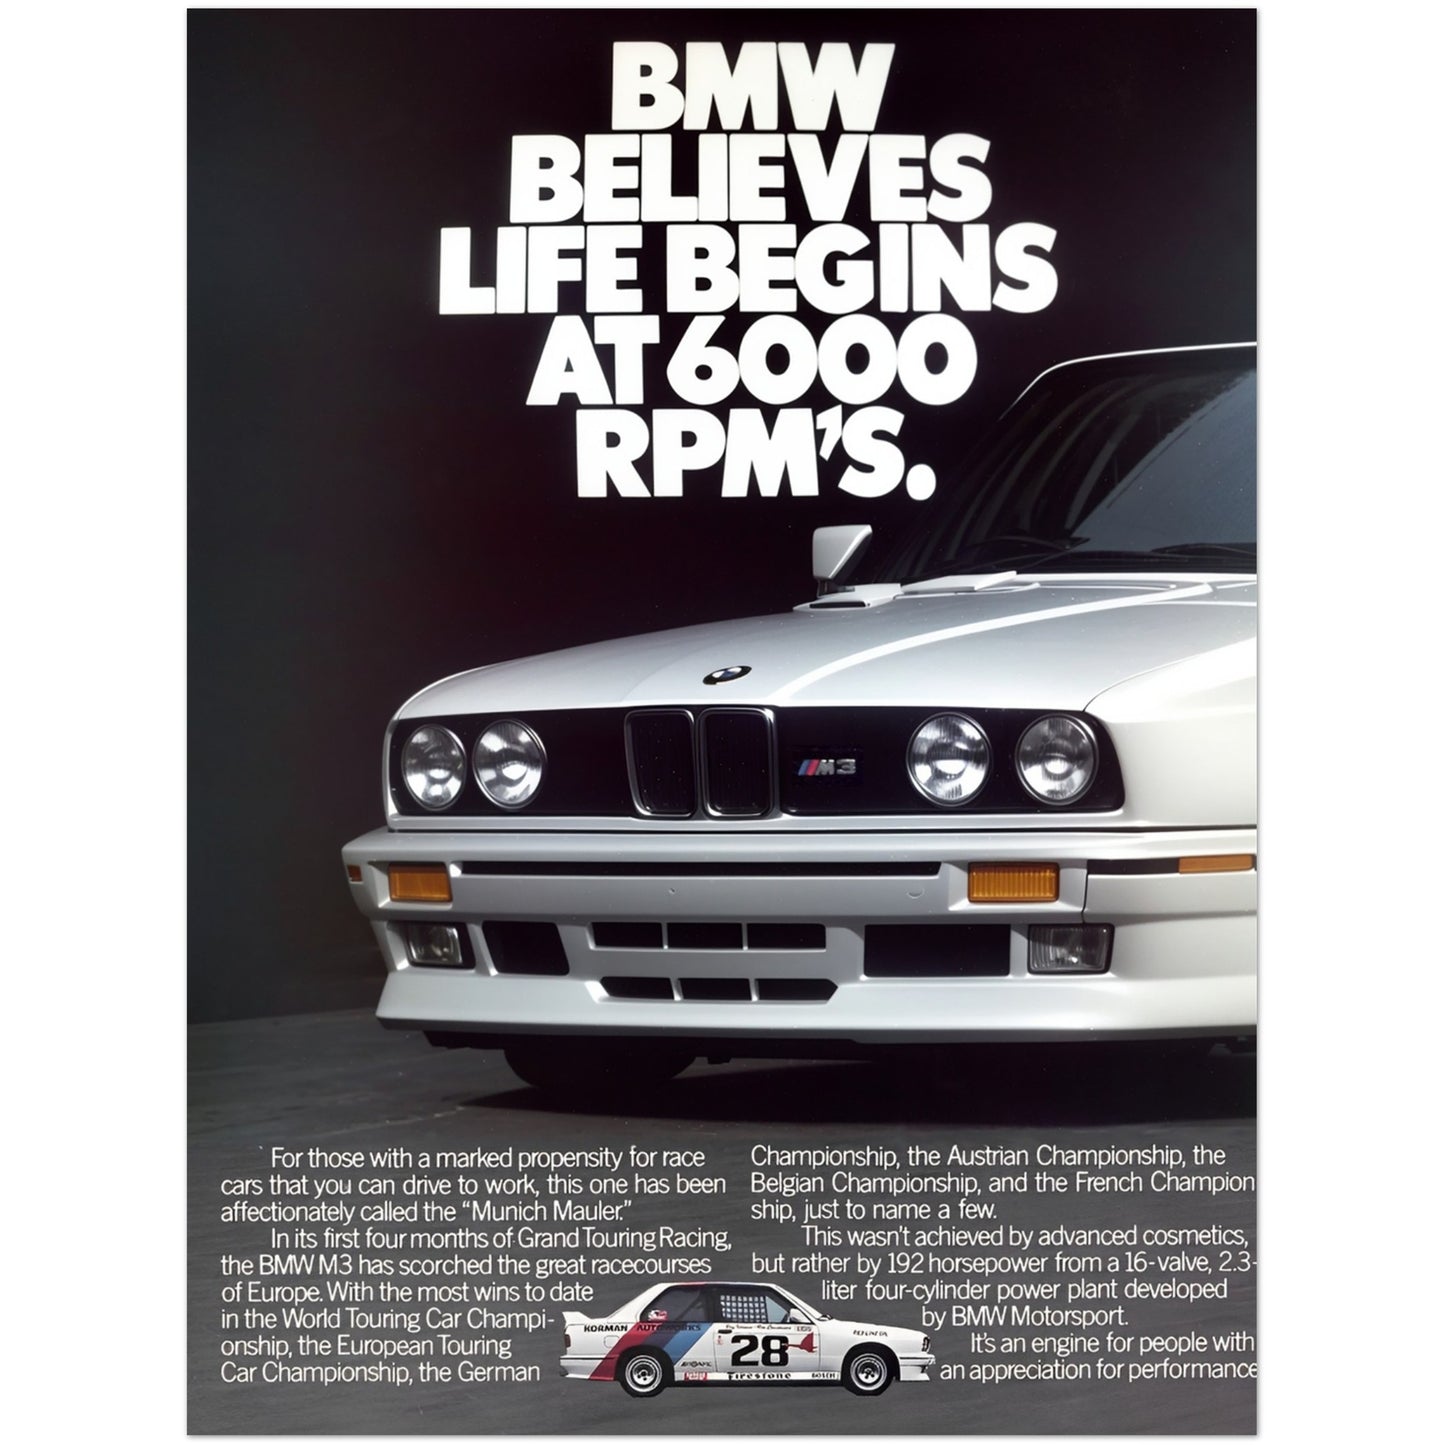 BMW E30 M3 BMW believes life begins at 6000 RPM´s poster 